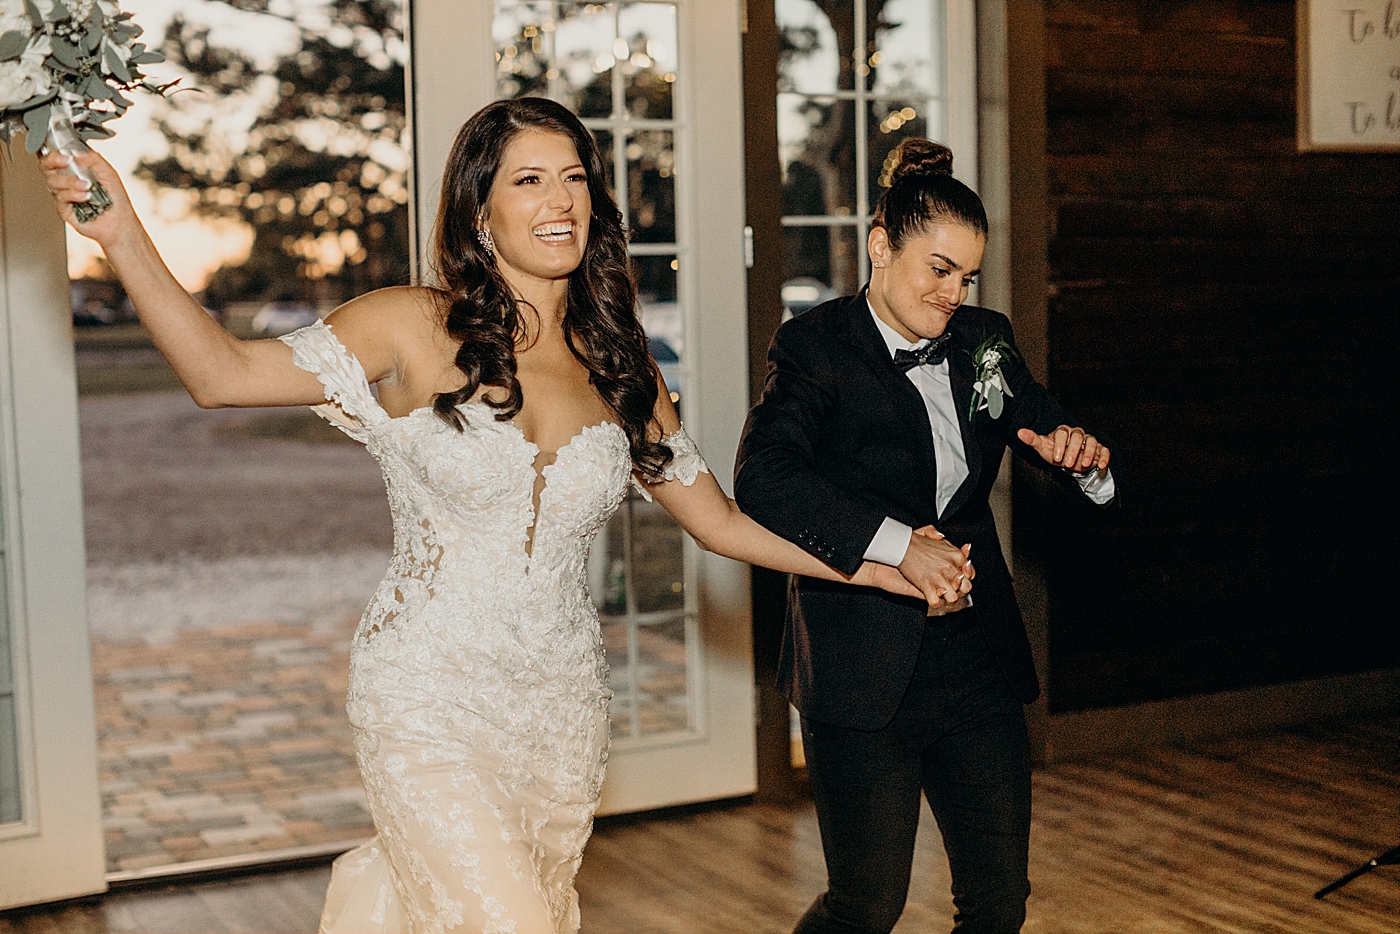 Couples excited entrance into Reception Ever After Farms Wedding Photography captured by South Florida Wedding Photographer Maggie Alvarez Photography